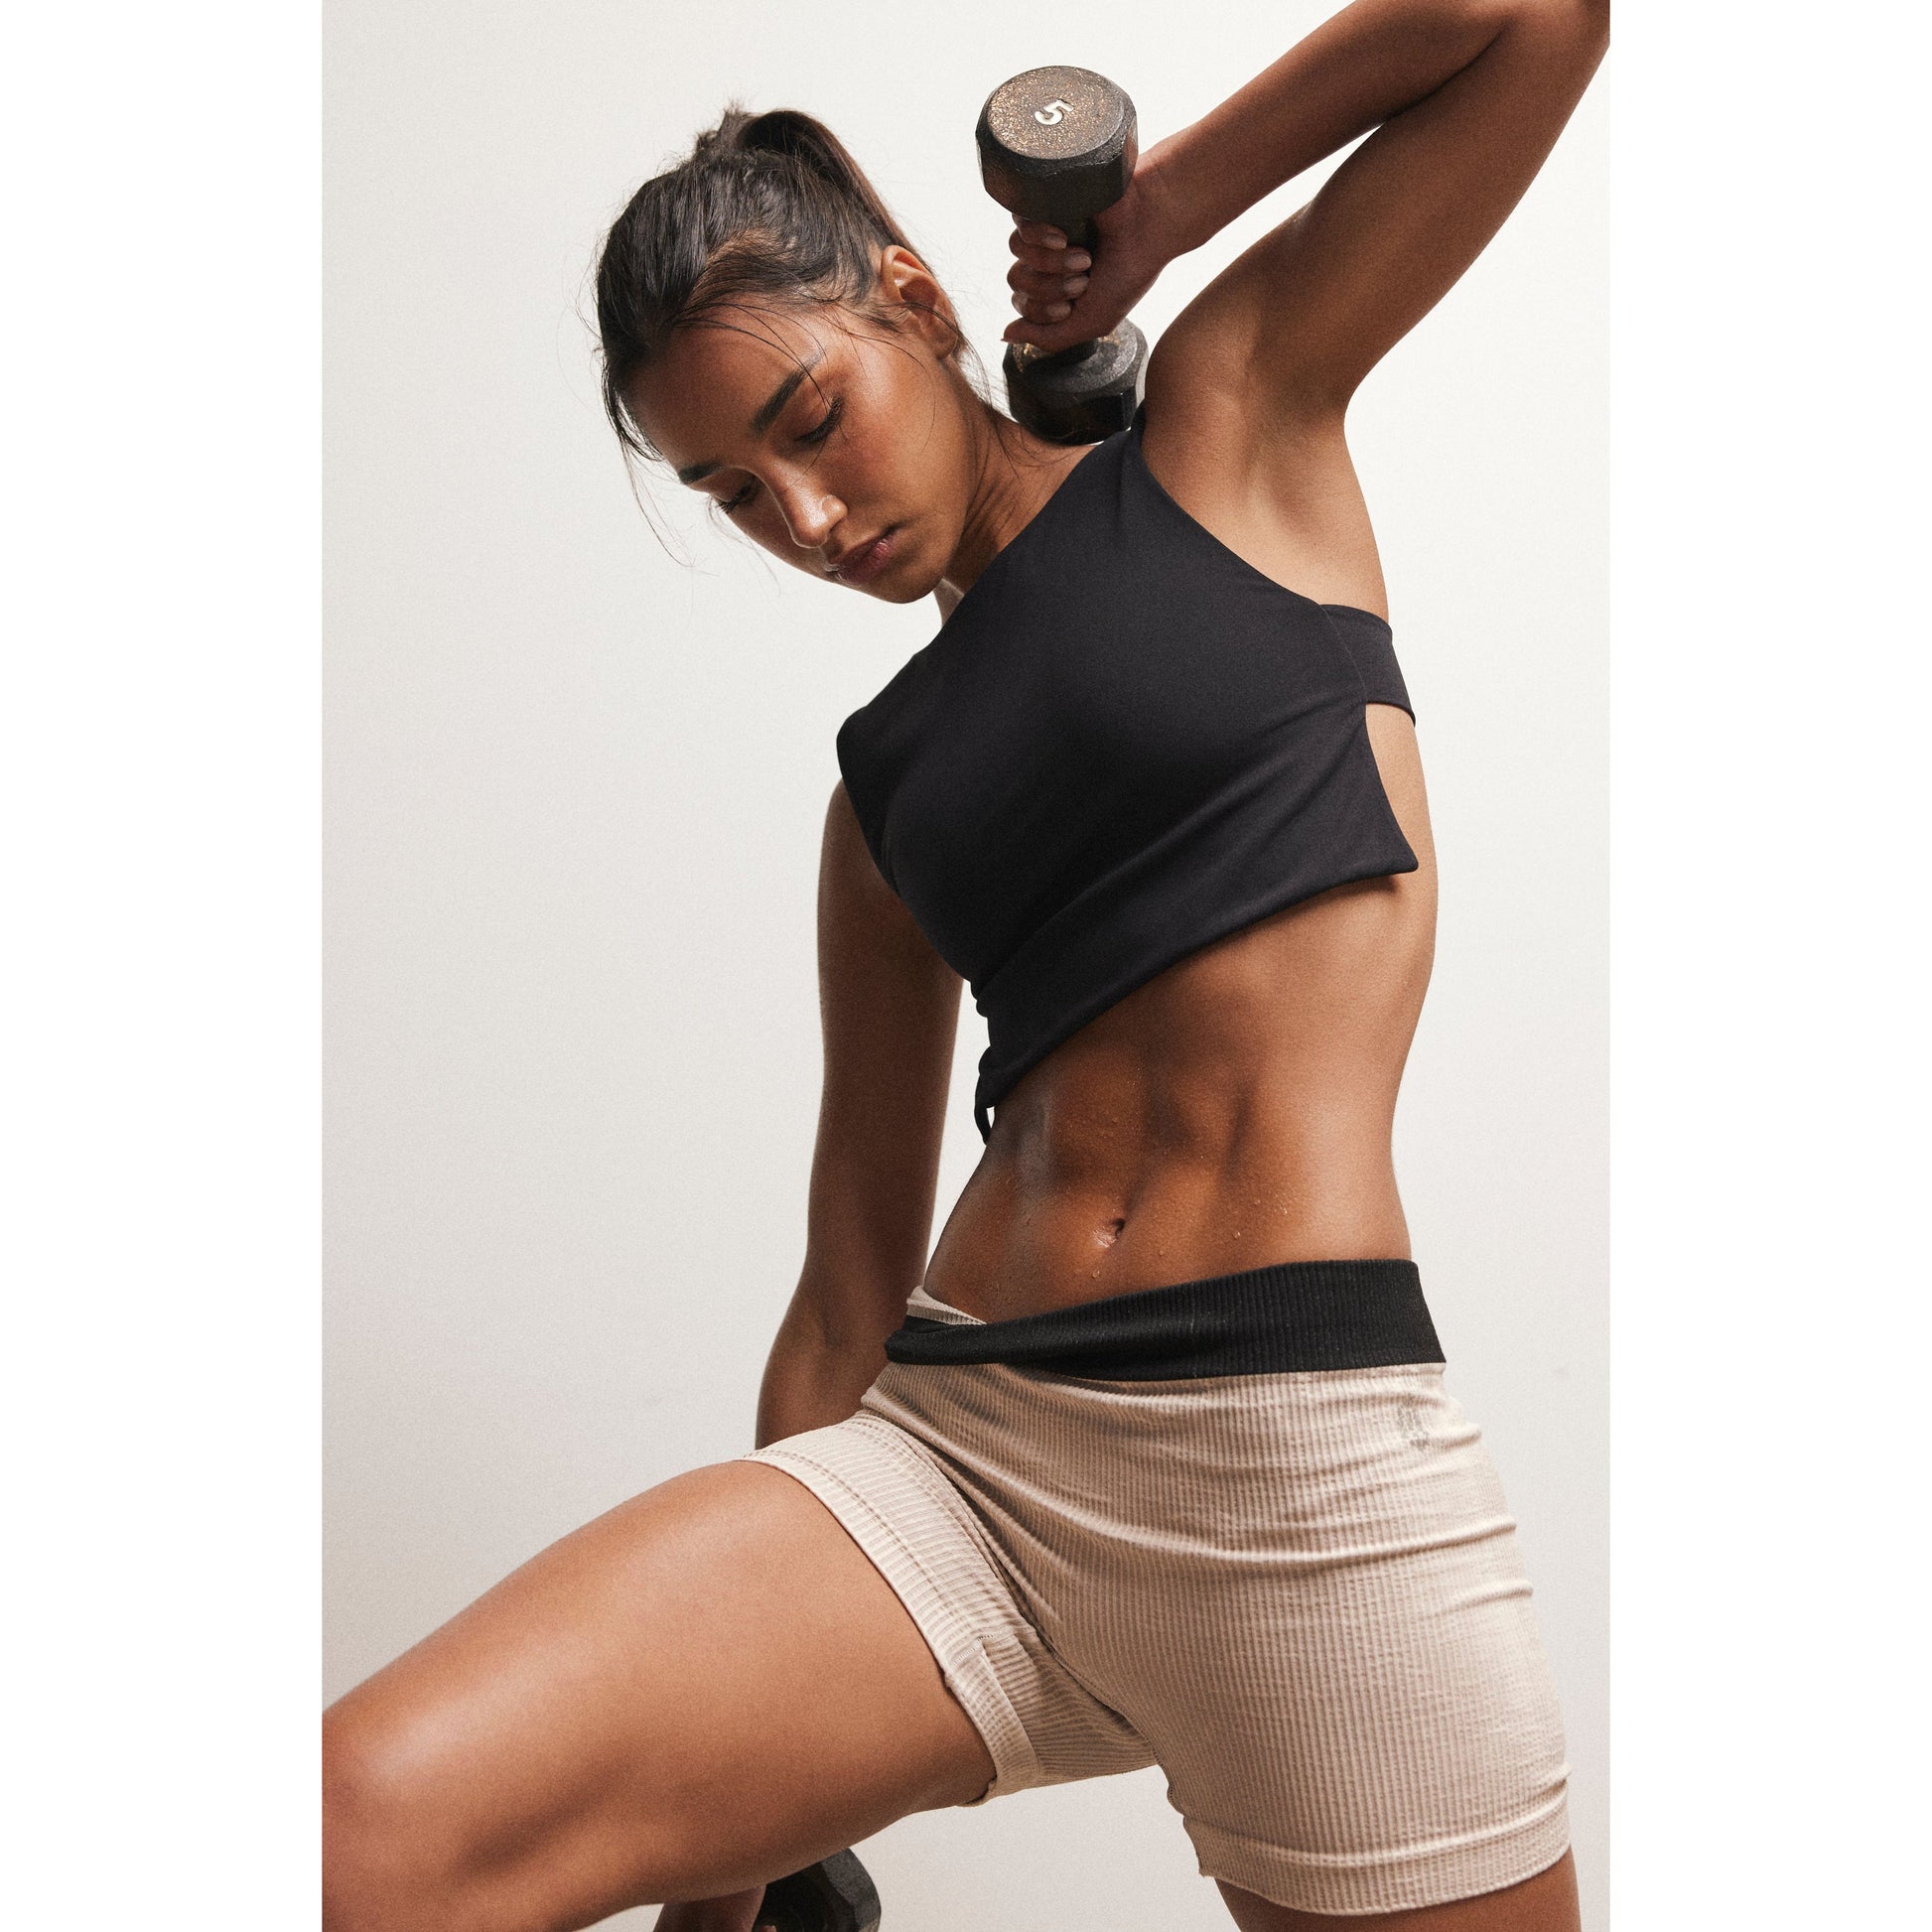 A fit woman lifting a dumbbell, focusing intensely, showcasing toned abdominal muscles, wearing the Free People Movement Be Right Back Cami in black and beige shorts.